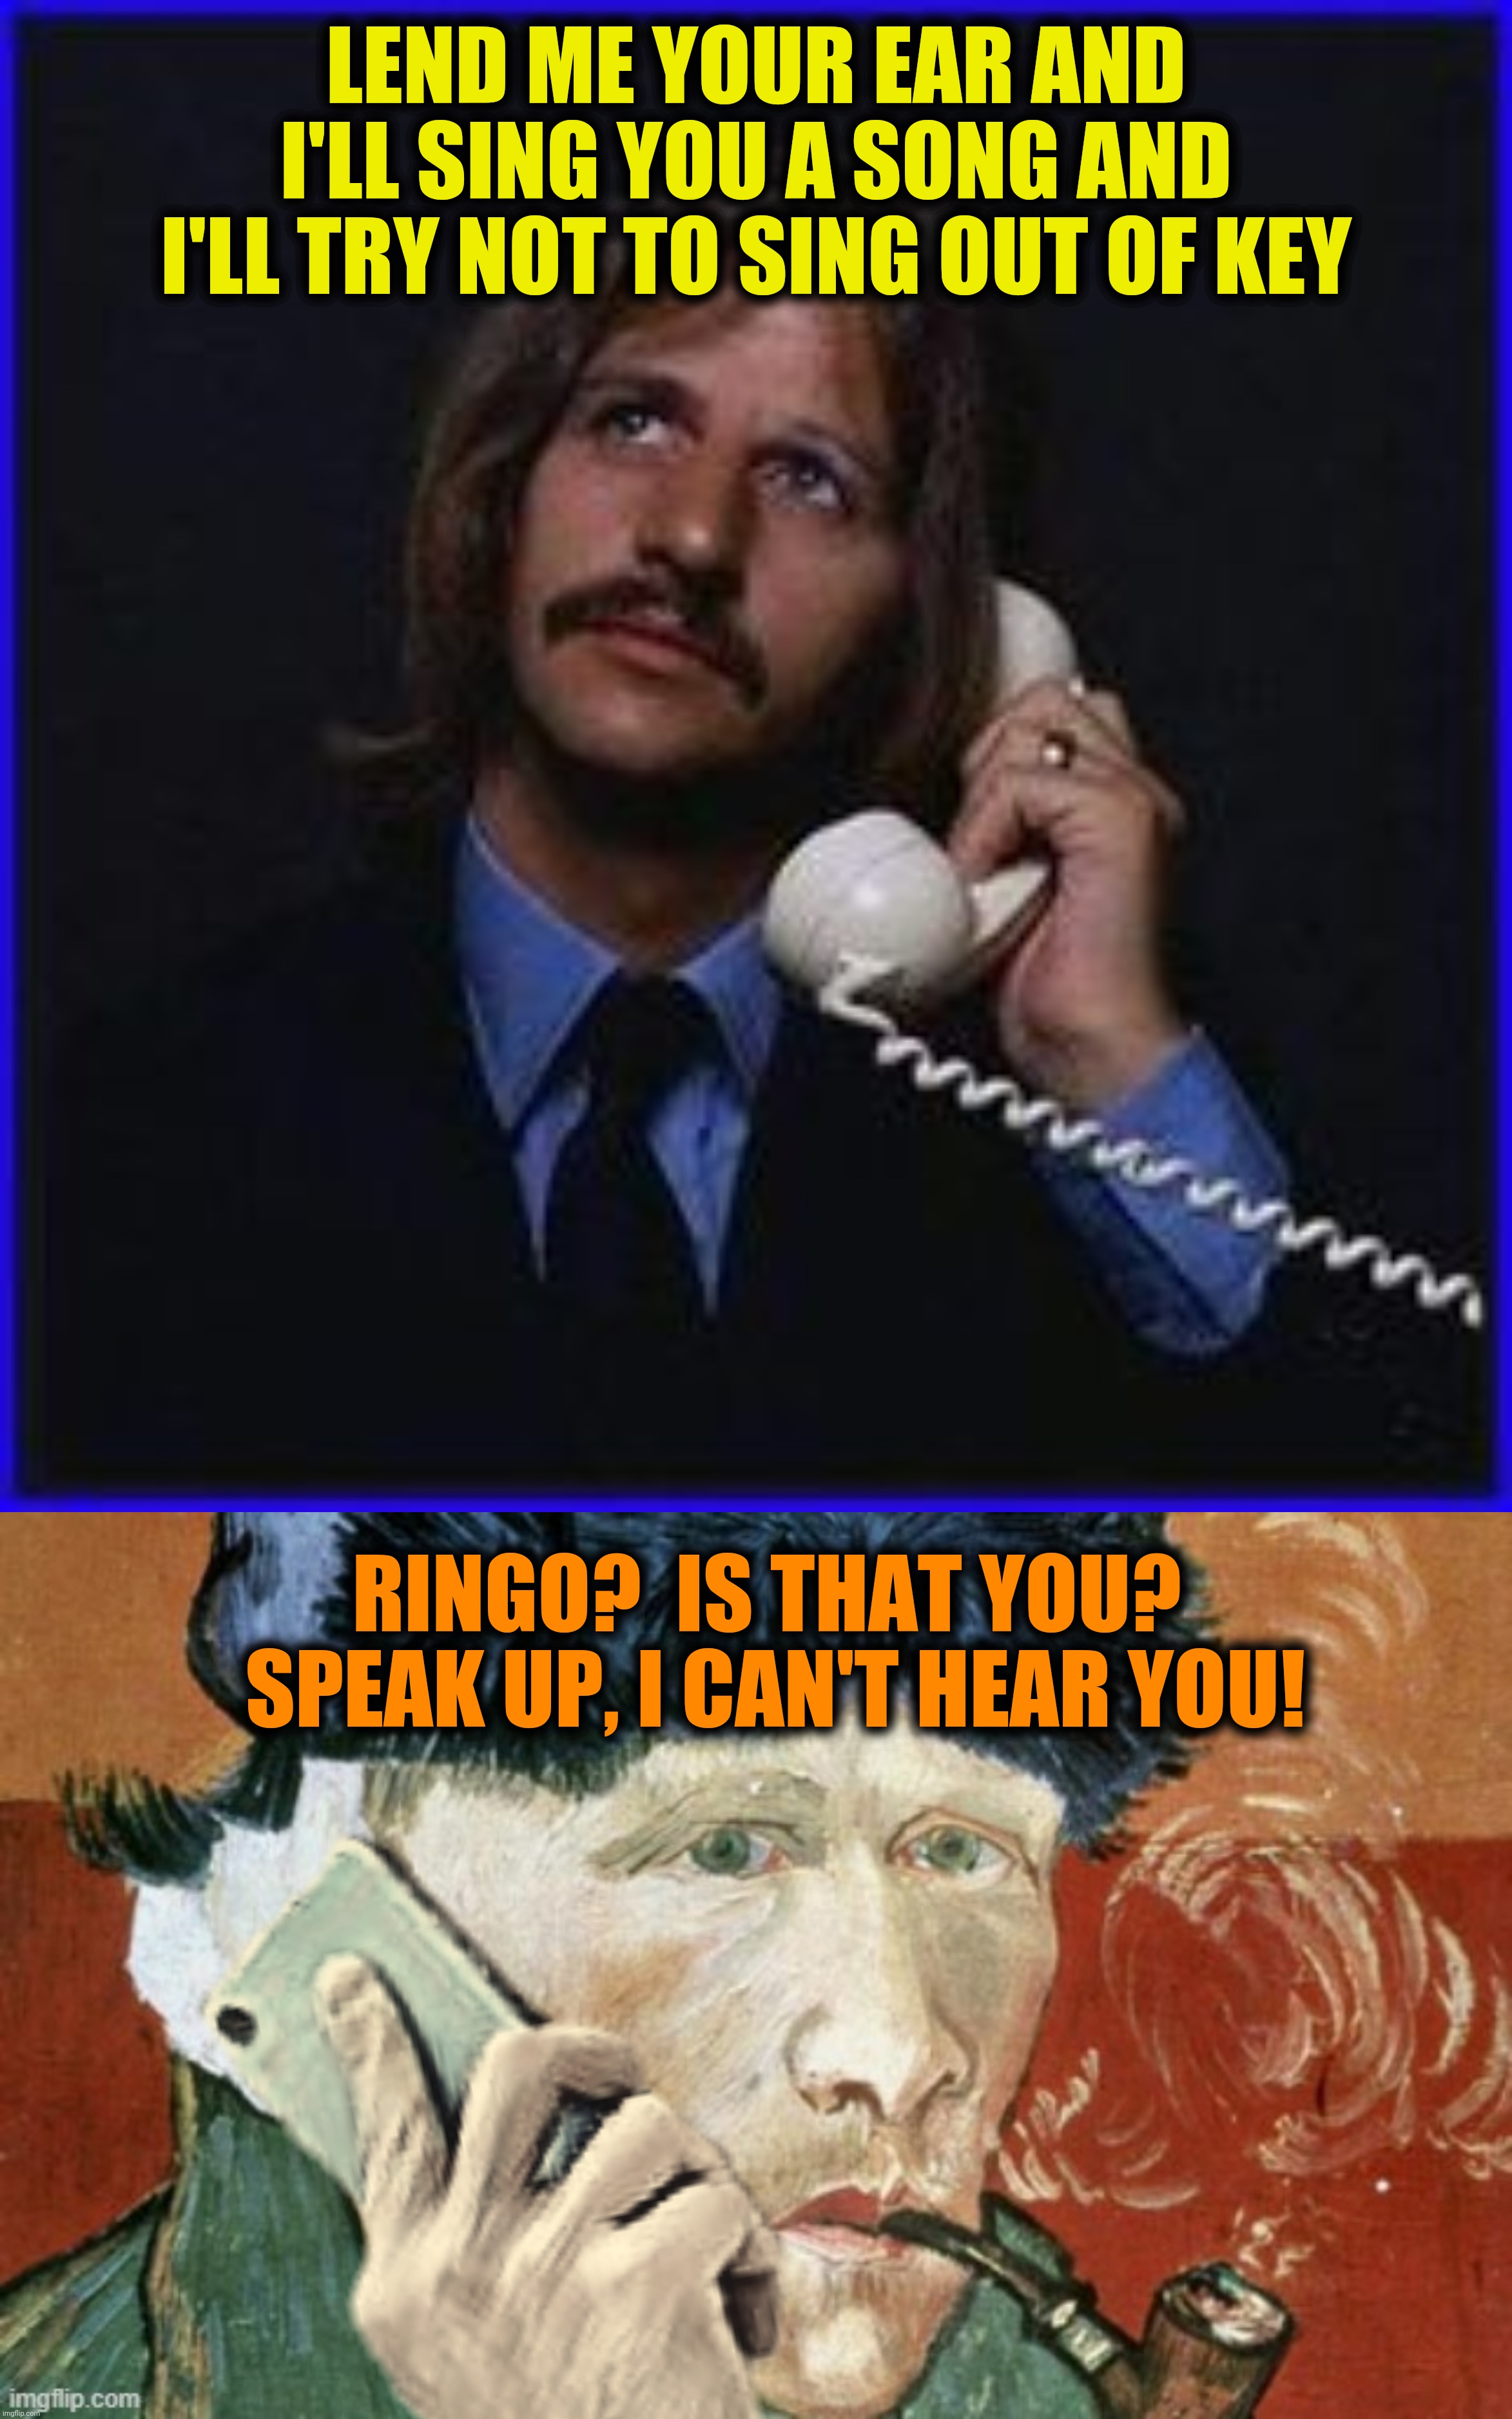 Listen to what the man said.  Concept inspired by a VinceVance meme, bad Photoshop by btbeeston | LEND ME YOUR EAR AND I'LL SING YOU A SONG AND I'LL TRY NOT TO SING OUT OF KEY; RINGO?  IS THAT YOU?  SPEAK UP, I CAN'T HEAR YOU! | image tagged in bad photoshop,vincent van gogh,ringo starr | made w/ Imgflip meme maker